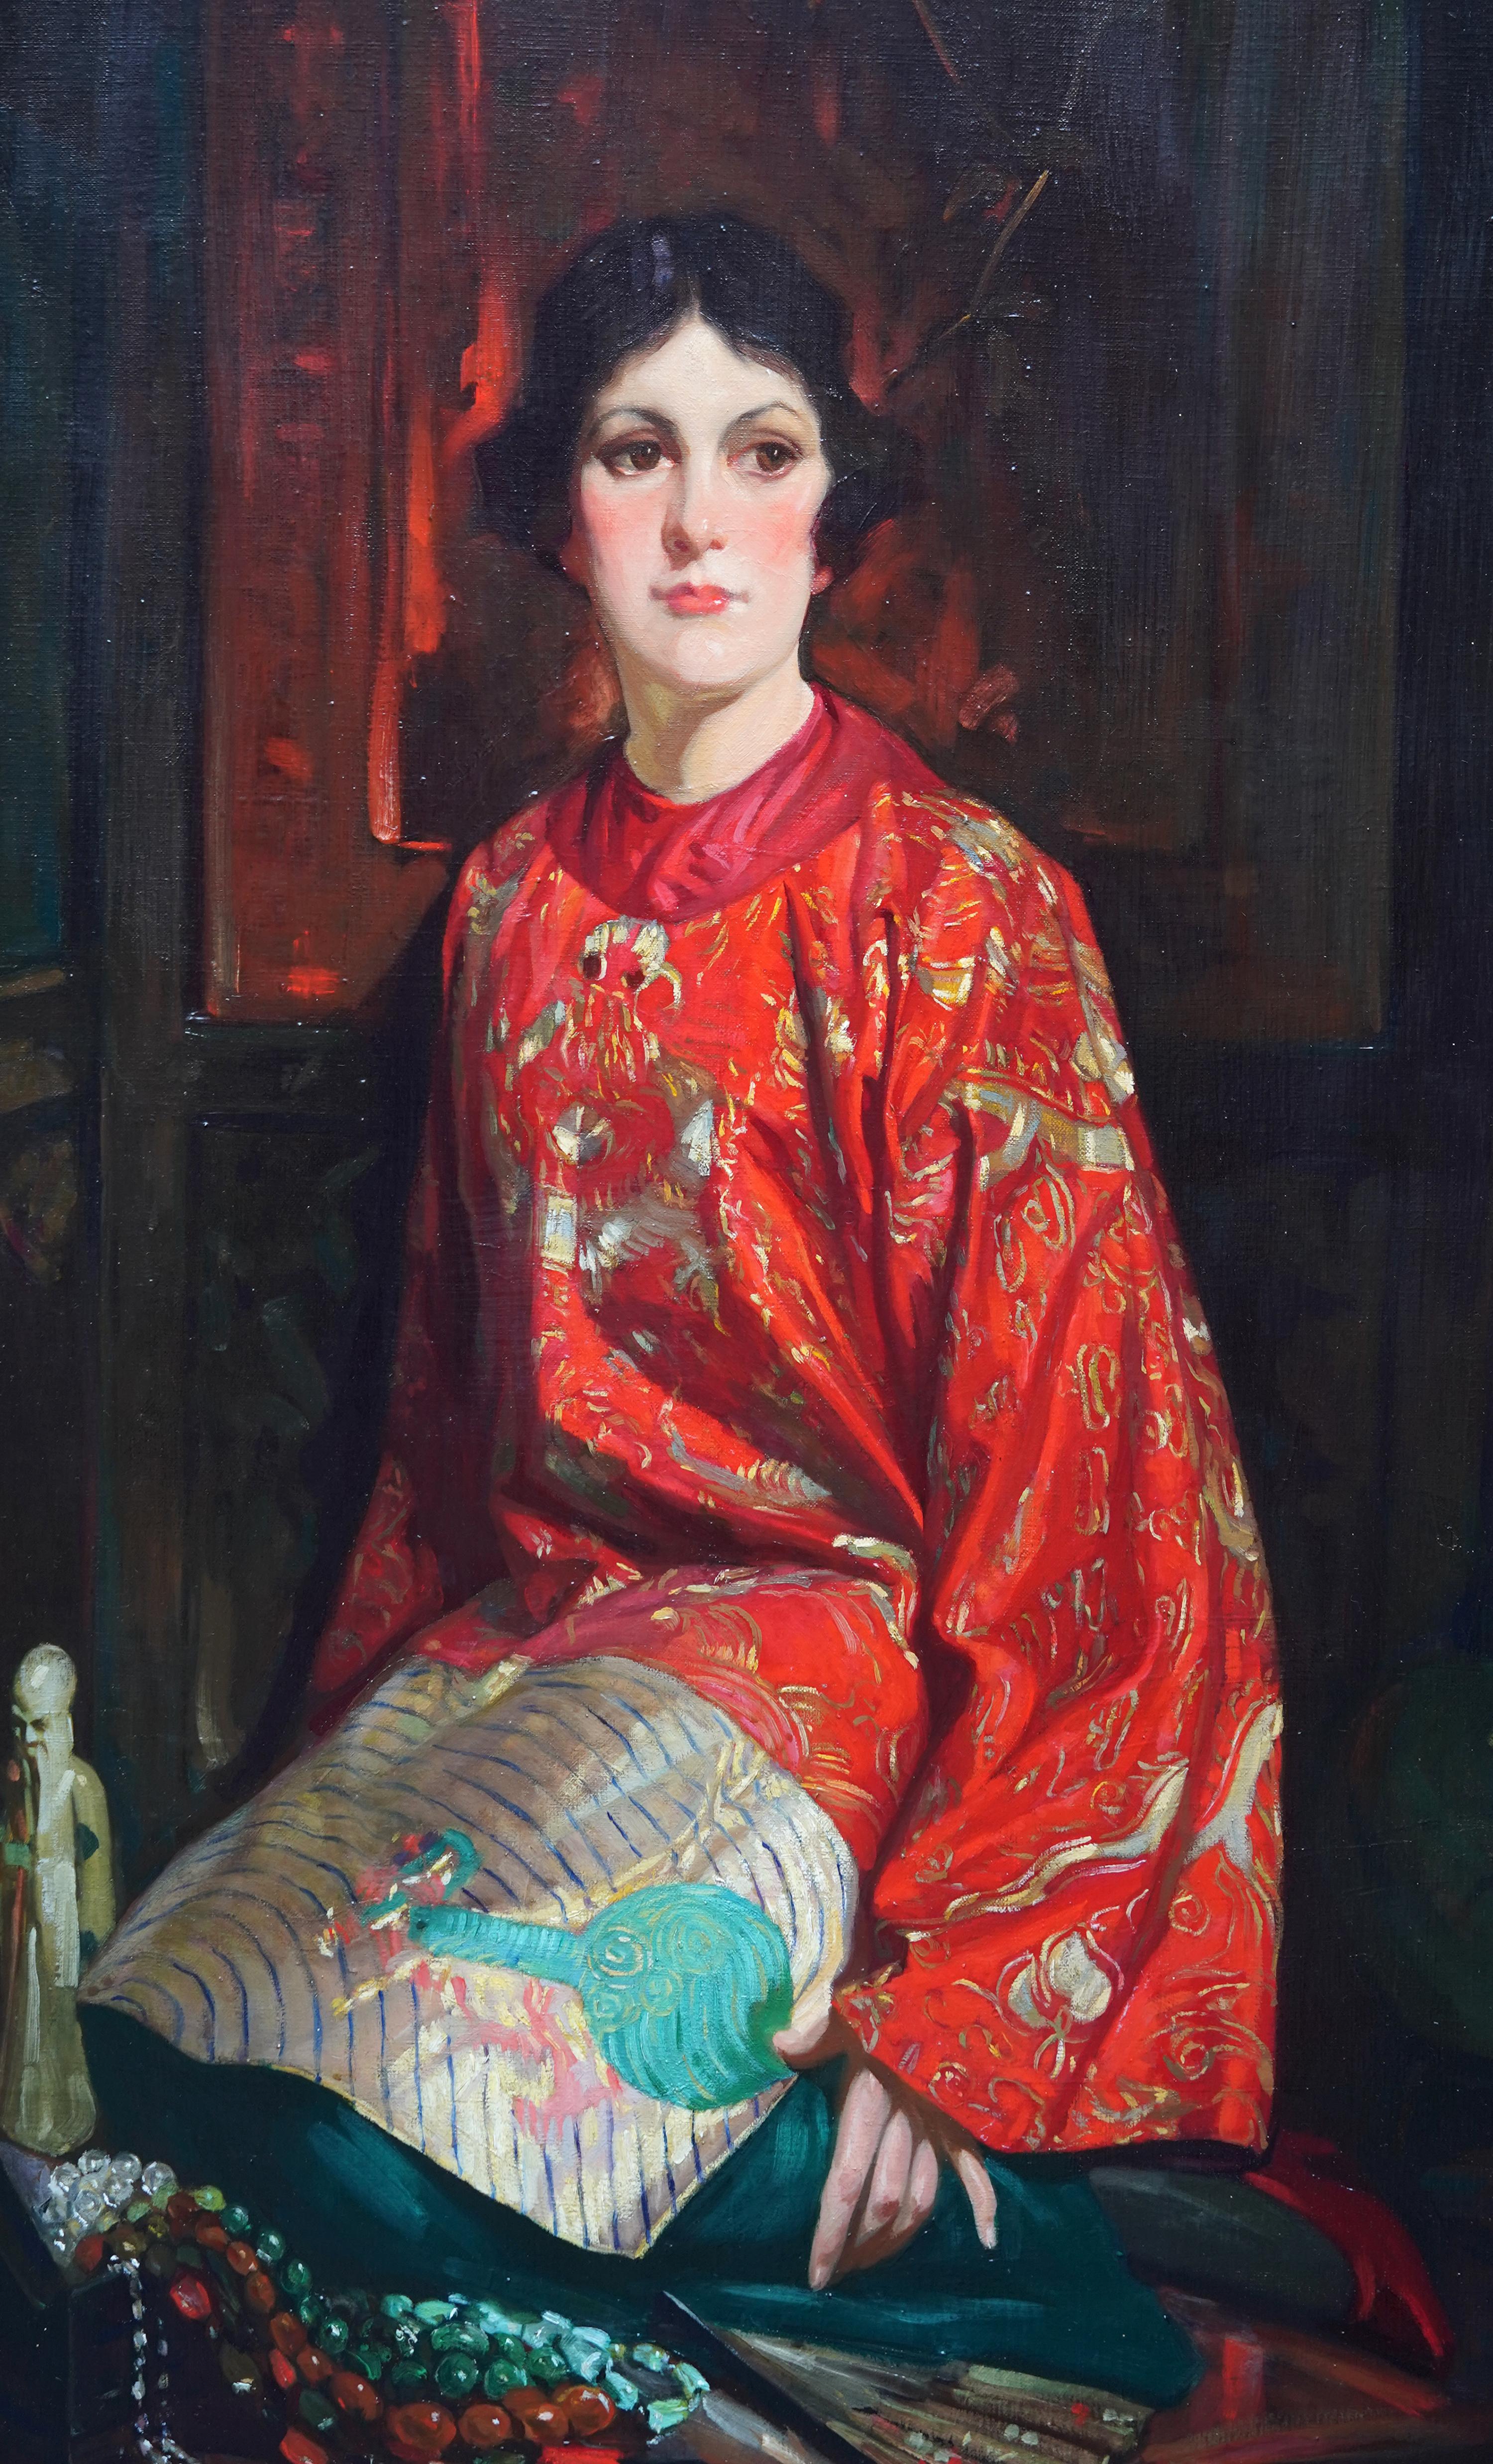 This fantastic Scottish Art Deco exhibited interior portrait oil painting is by Glasgow artist John Dobbie. It was painted in 1933 and exhibited that year at the Glasgow Institue of Fine Art and entitled Bric-a-Brac. The painting is of a dark haired